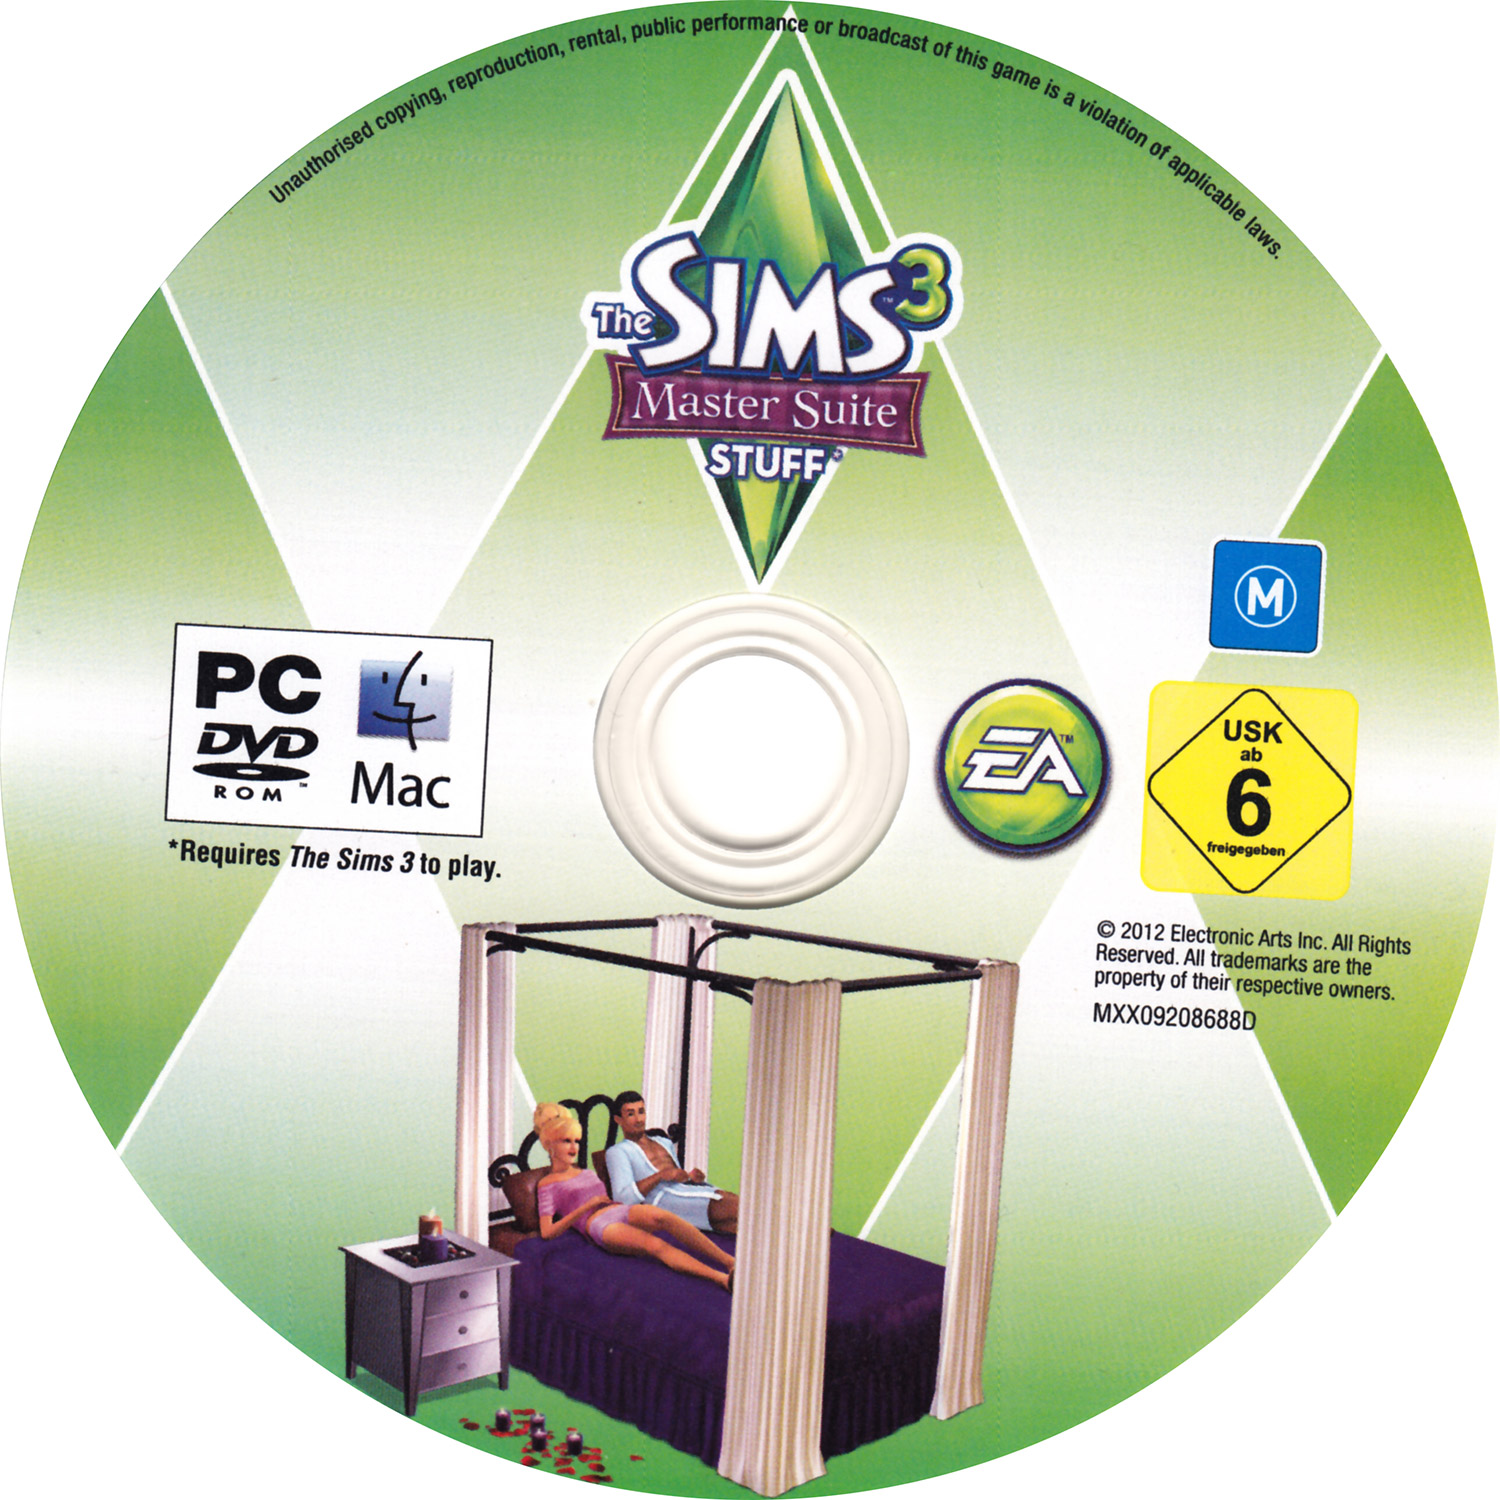 The Sims 3: Master Suite Stuff - CD obal